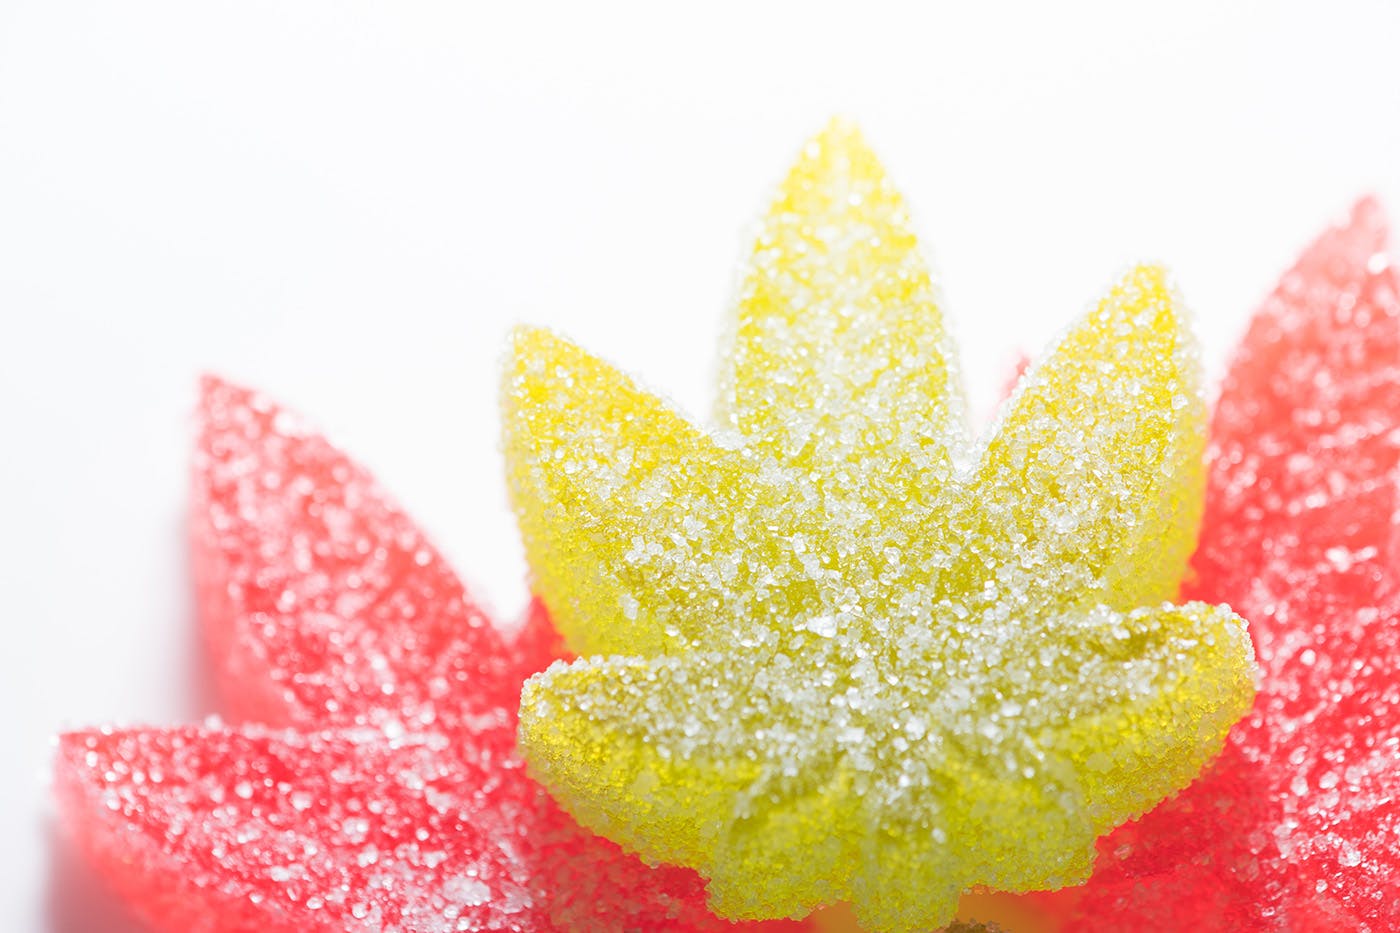 Yellow and pink delta 8 edibles on white background